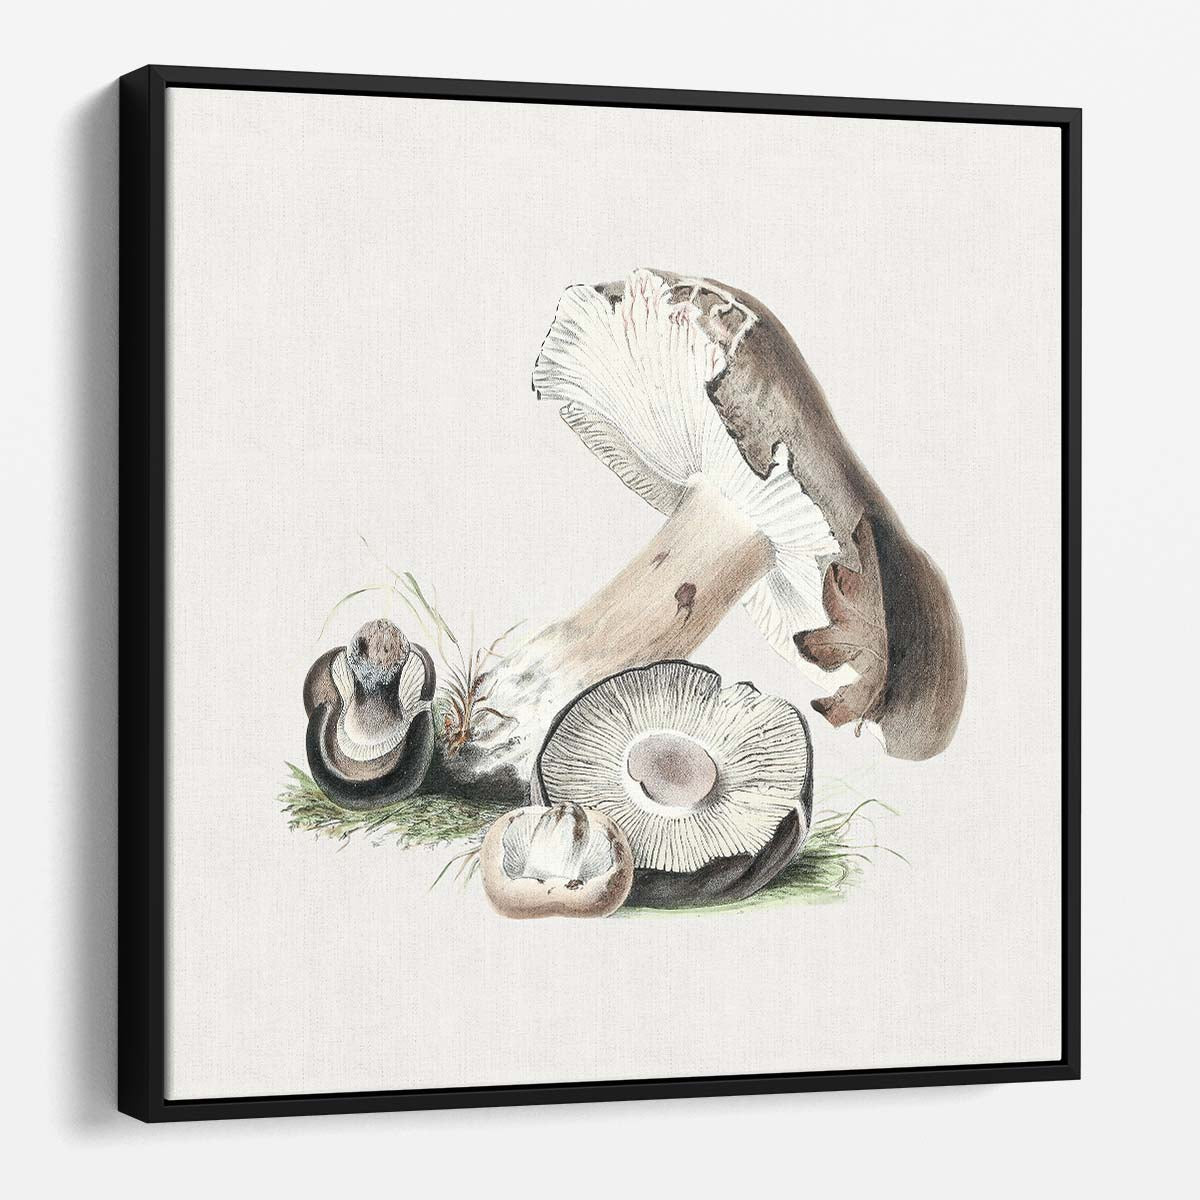 VintageInspired Agaricus Augustus Mushroom Illustration Wall Art by Luxuriance Designs. Made in USA.